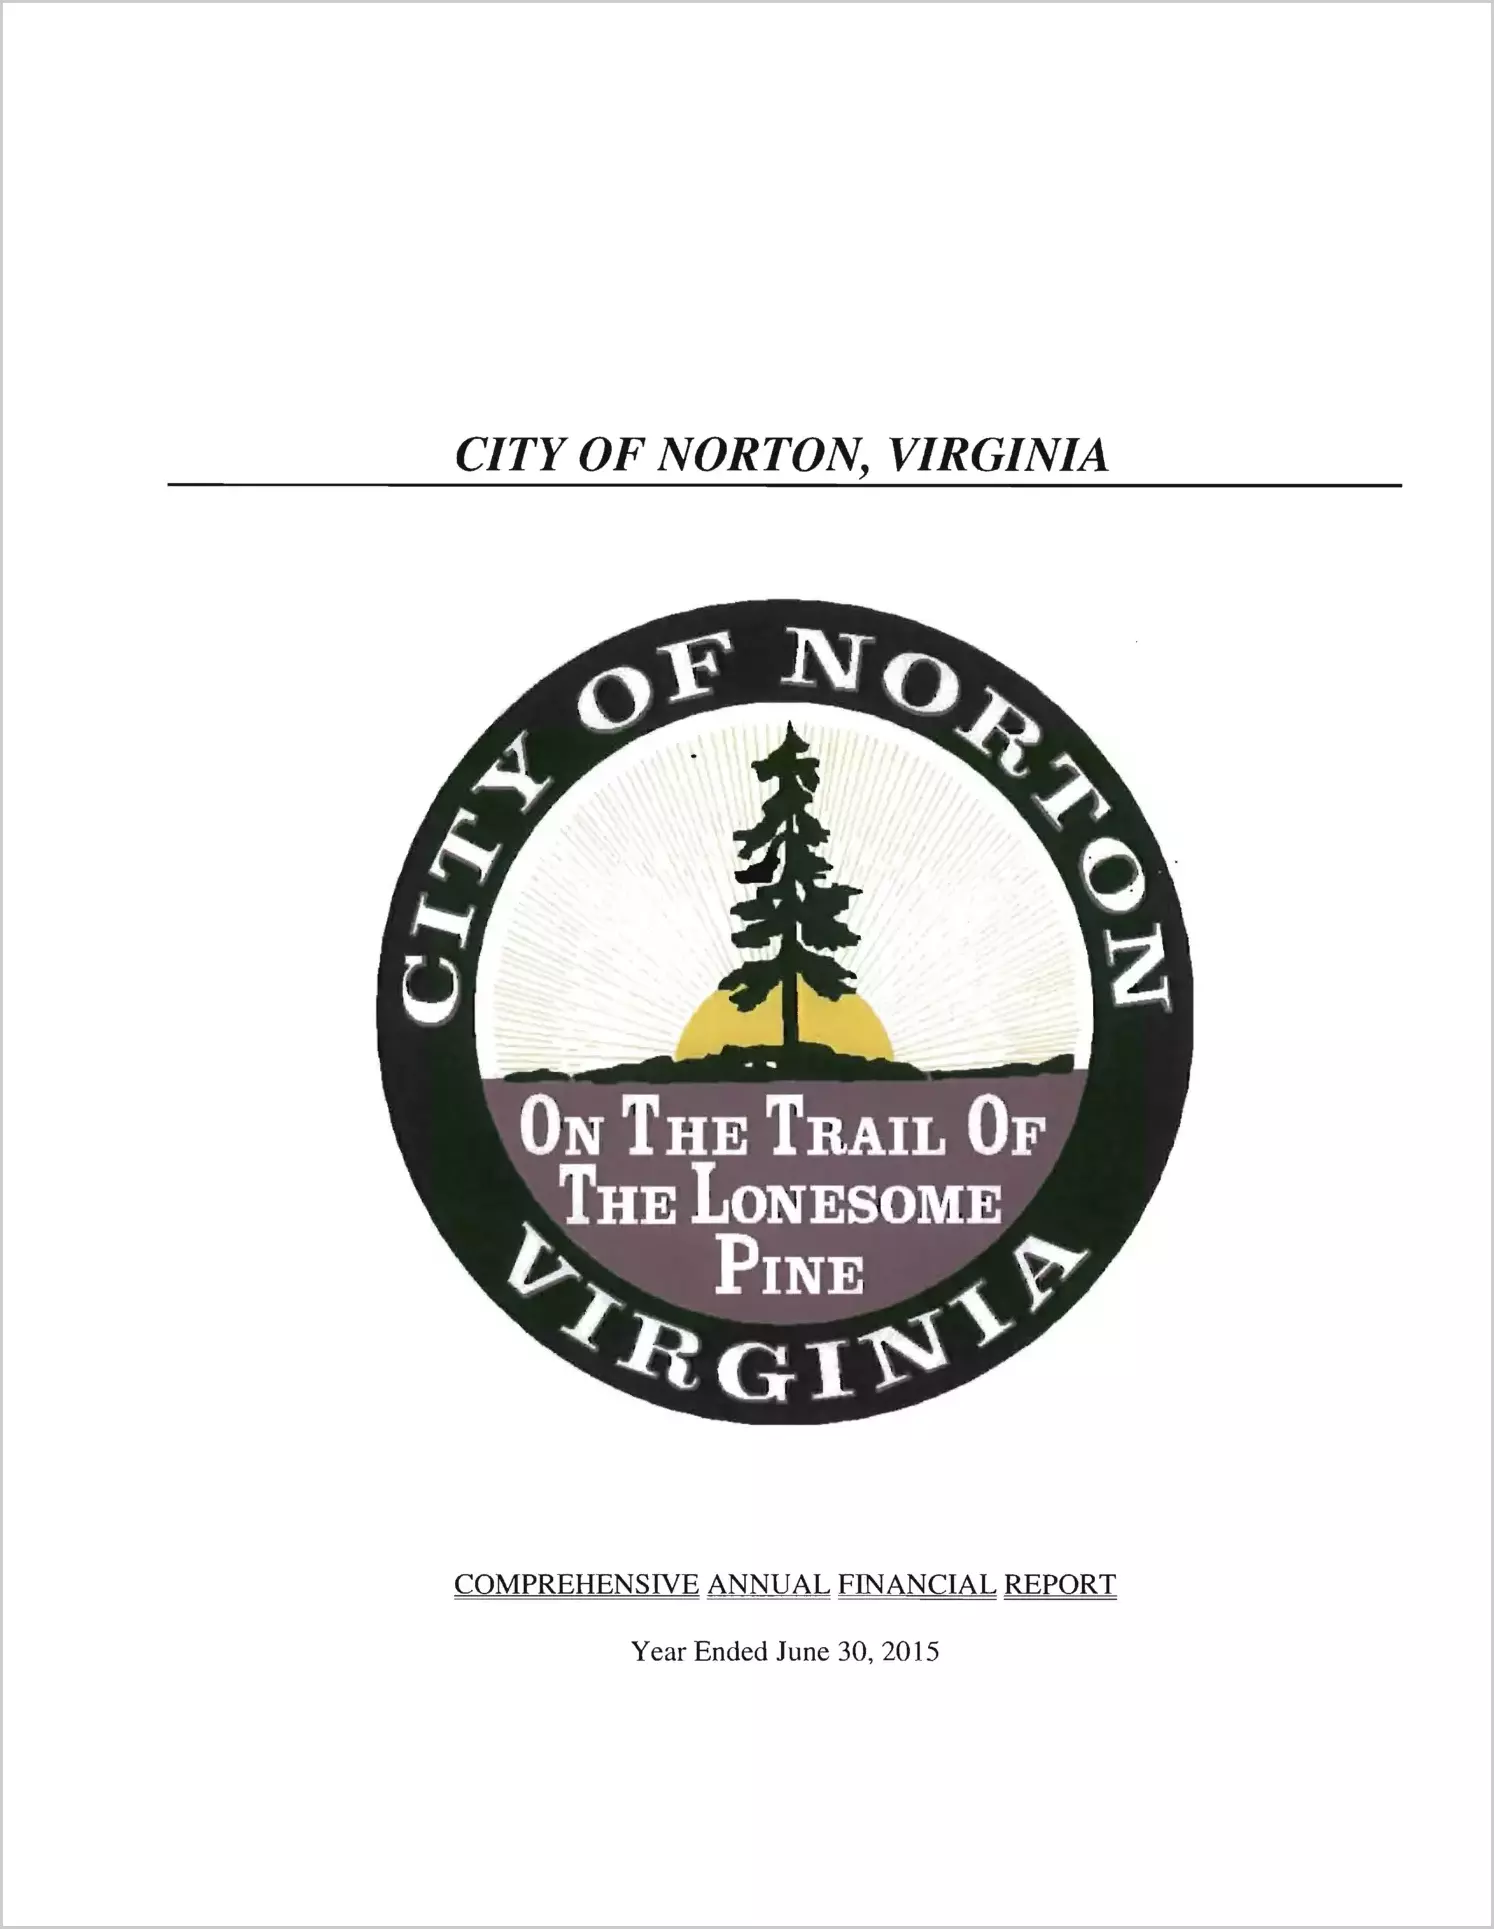 2015 Annual Financial Report for City of Norton